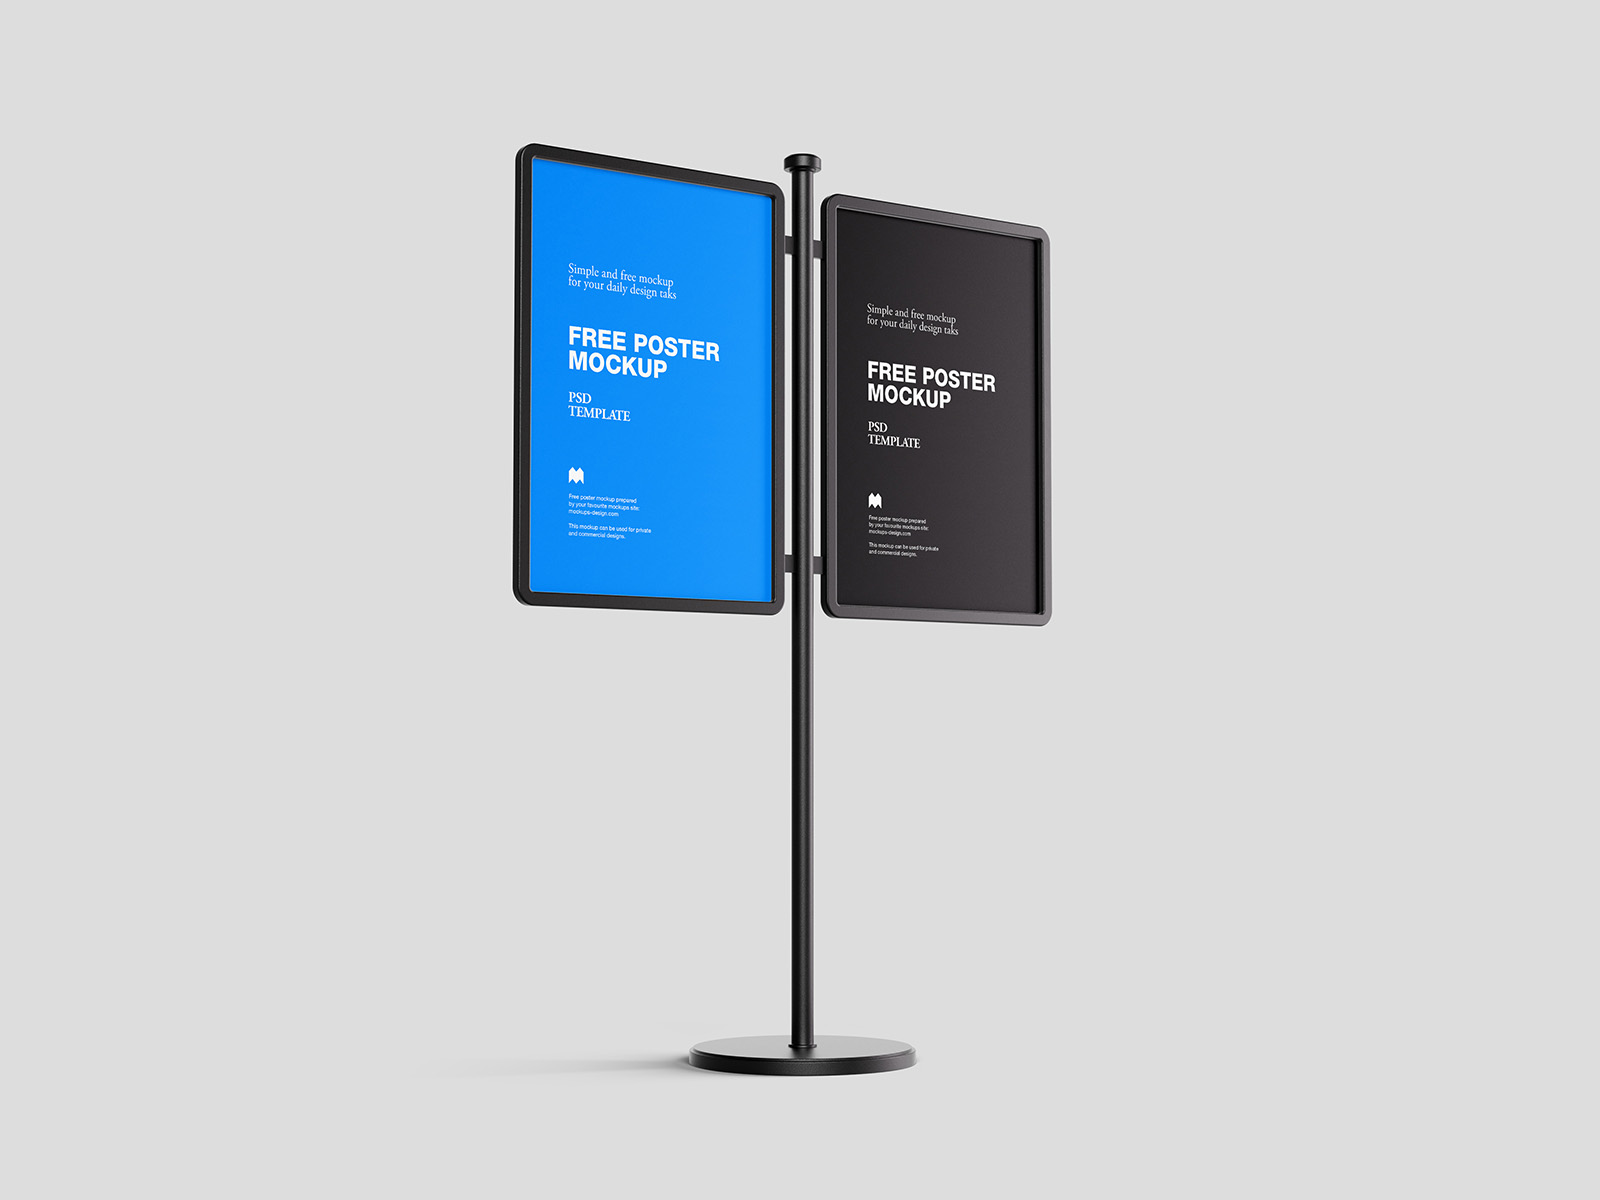 Double poster stand mockup